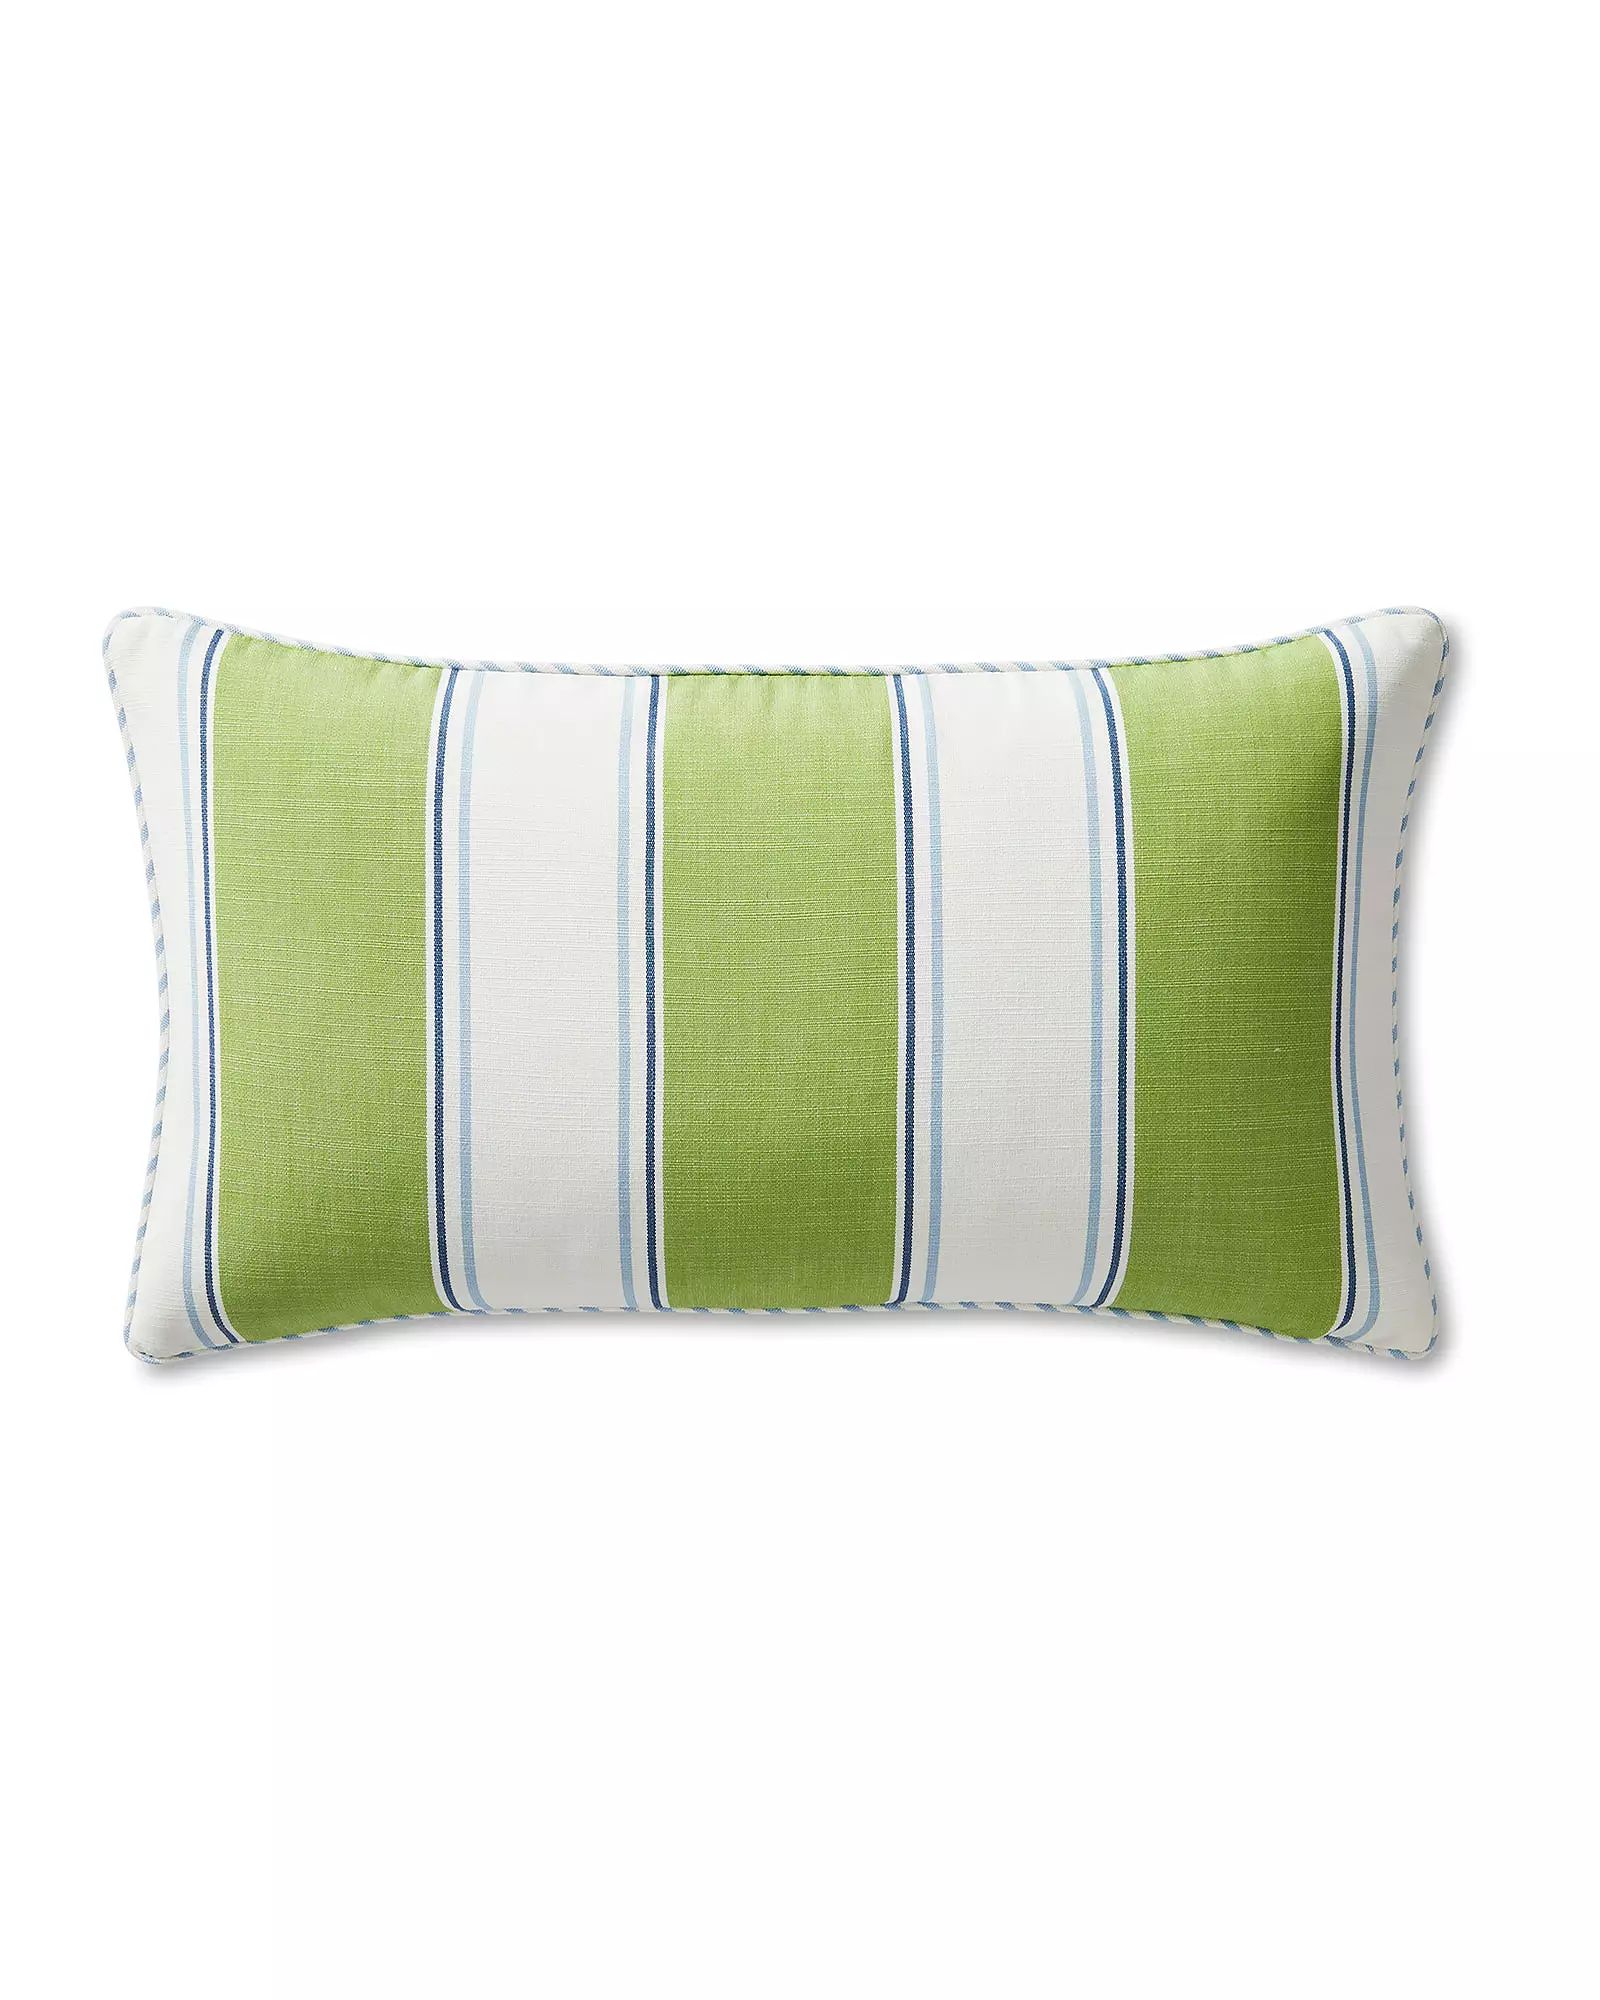 Perennials Port Stripe Pillow Cover | Serena and Lily